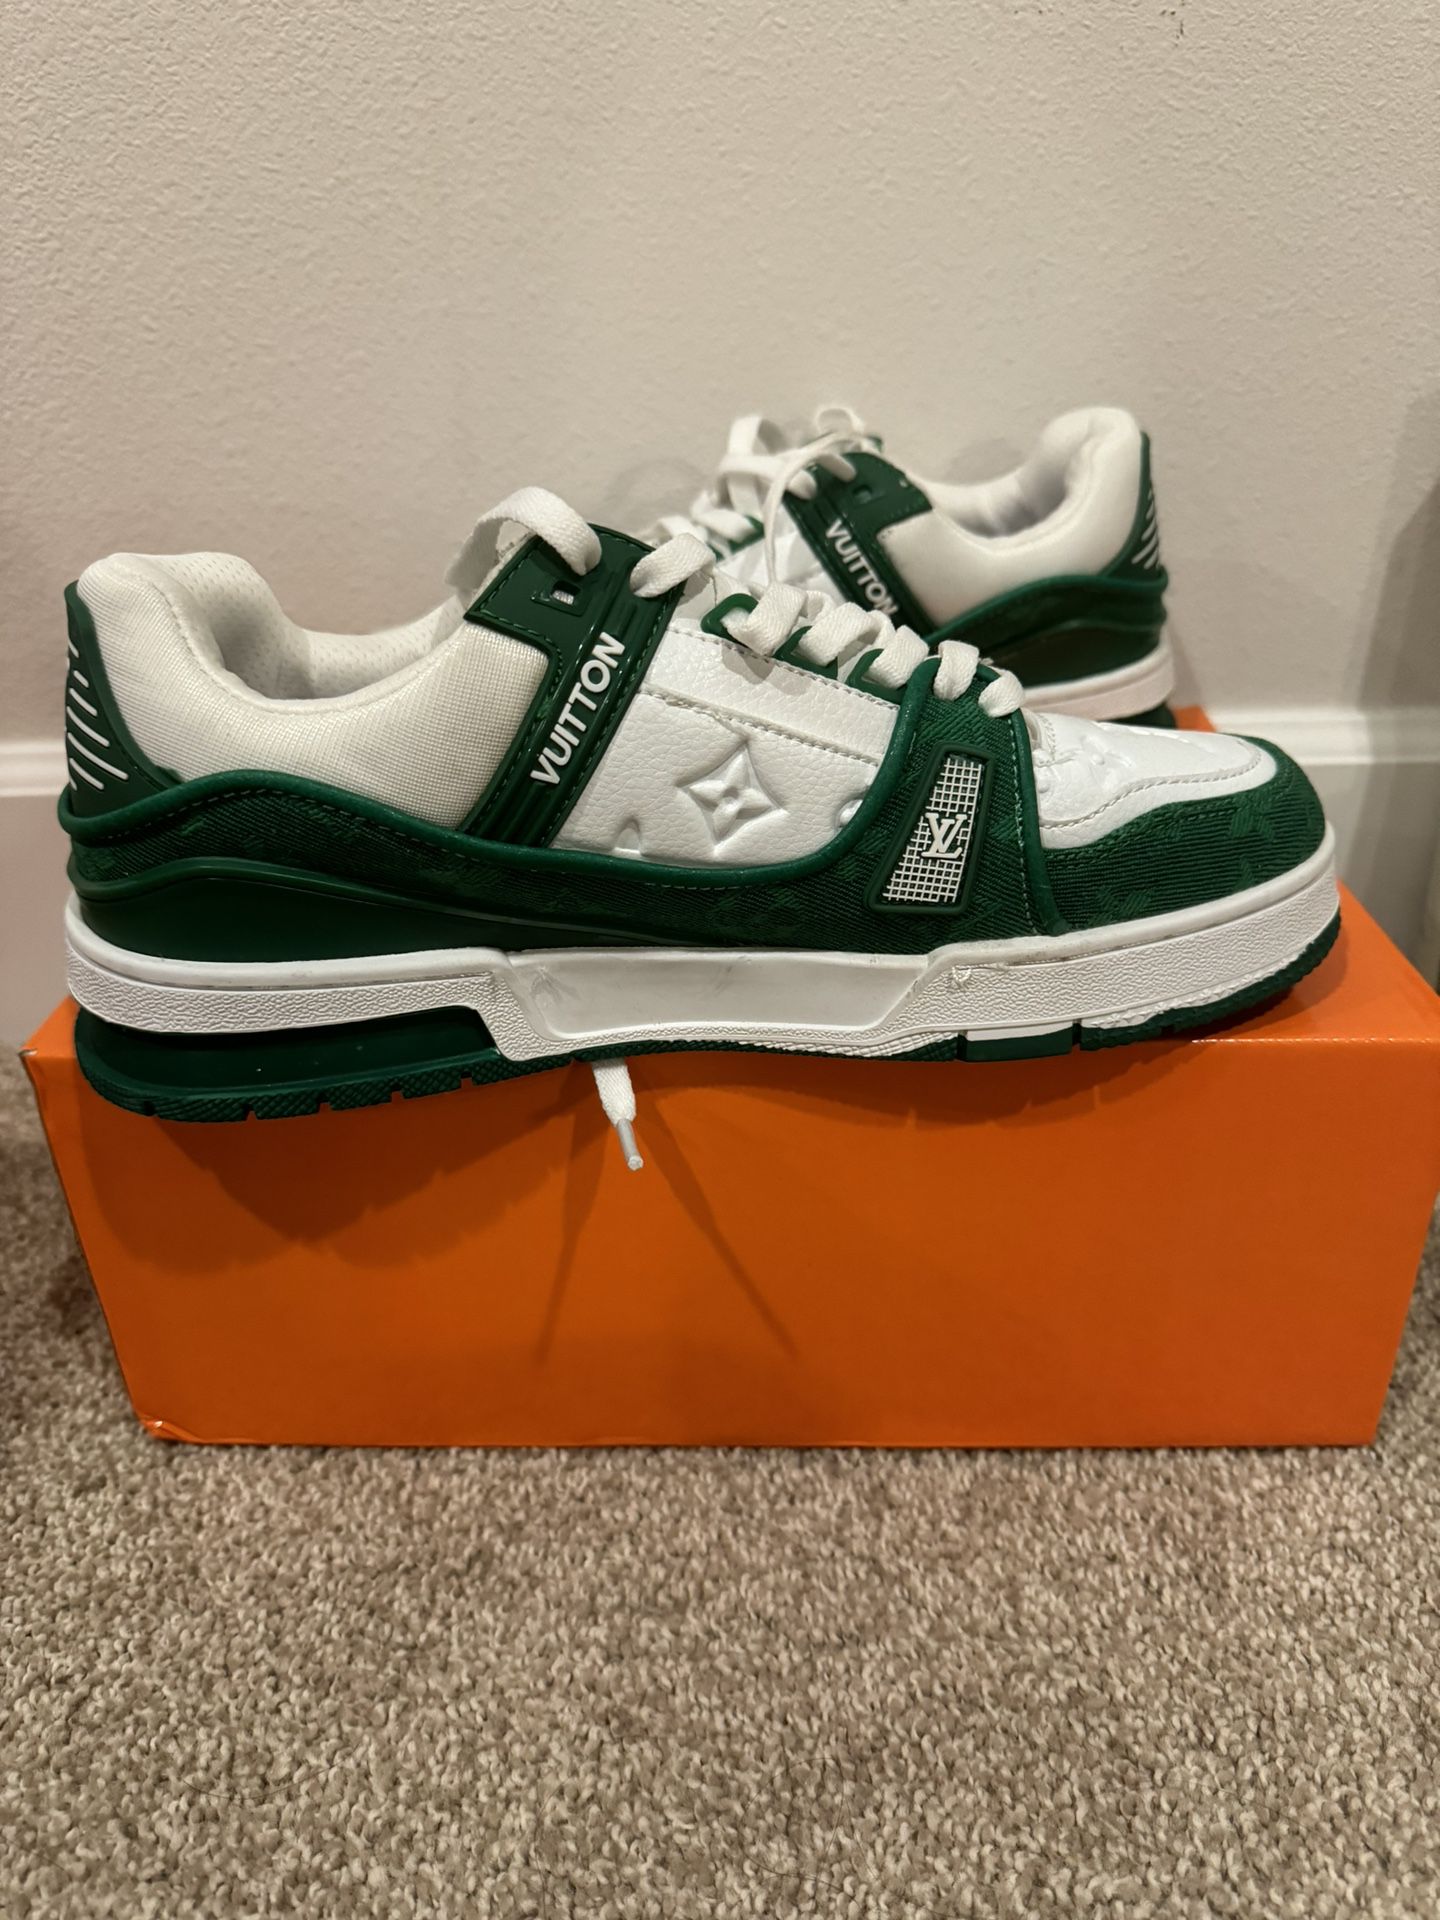 Louis Vuitton Green Trainers Size 9